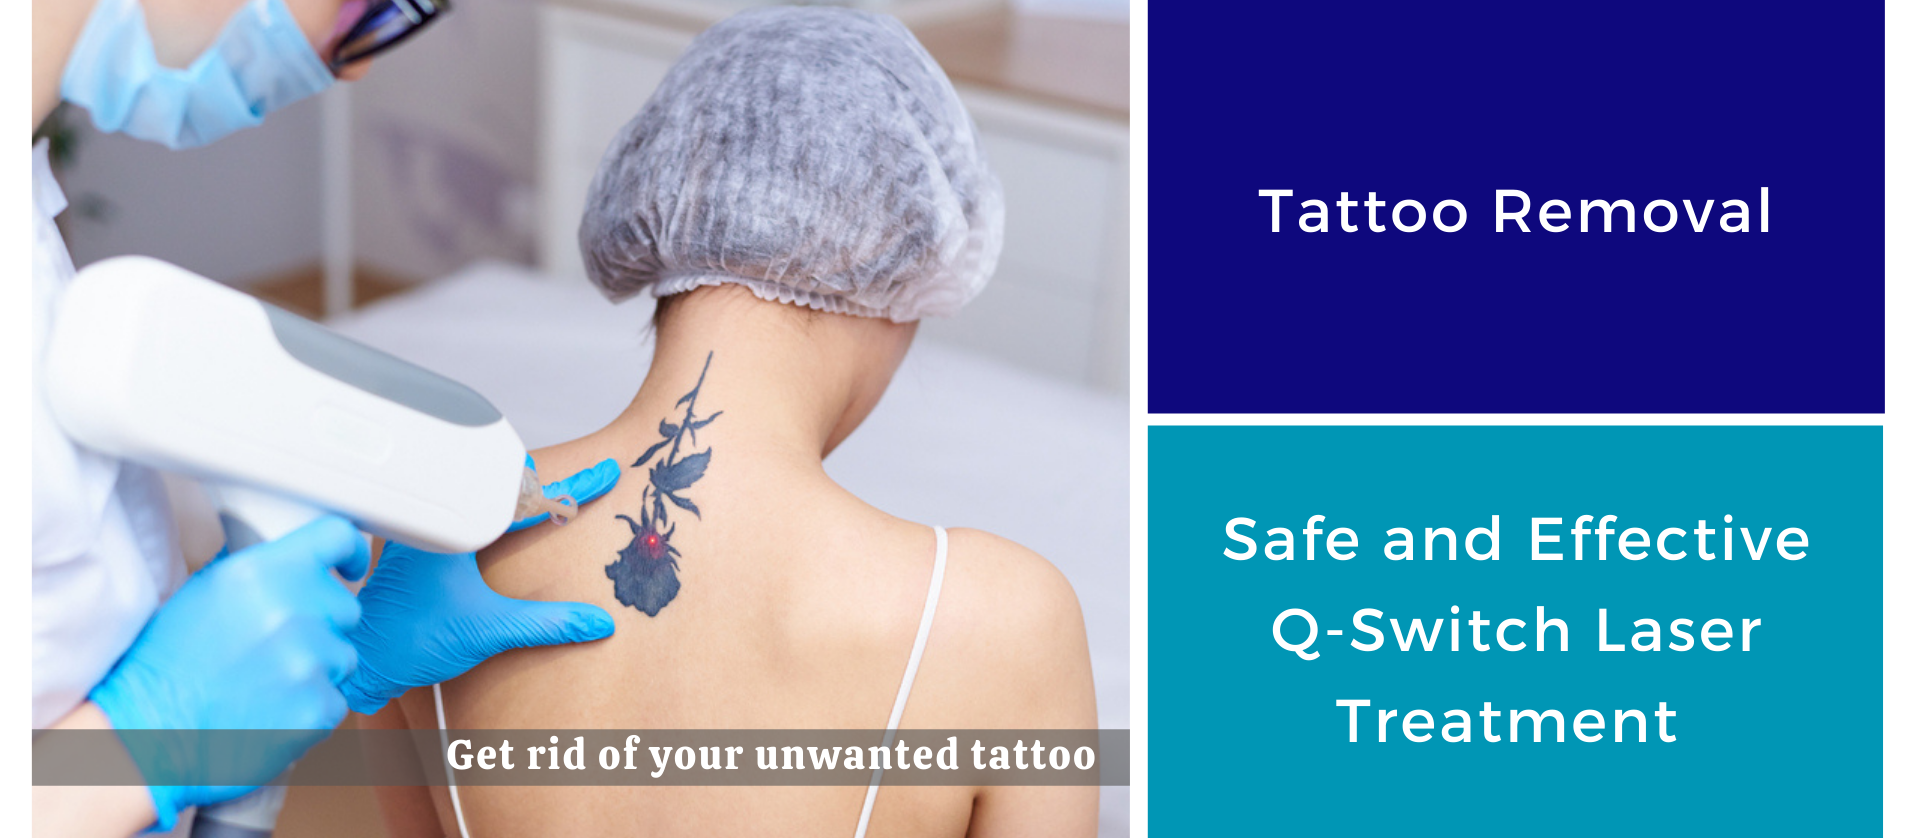 Tattoo Removal Laser Technology - The Bombay Skin Clinic